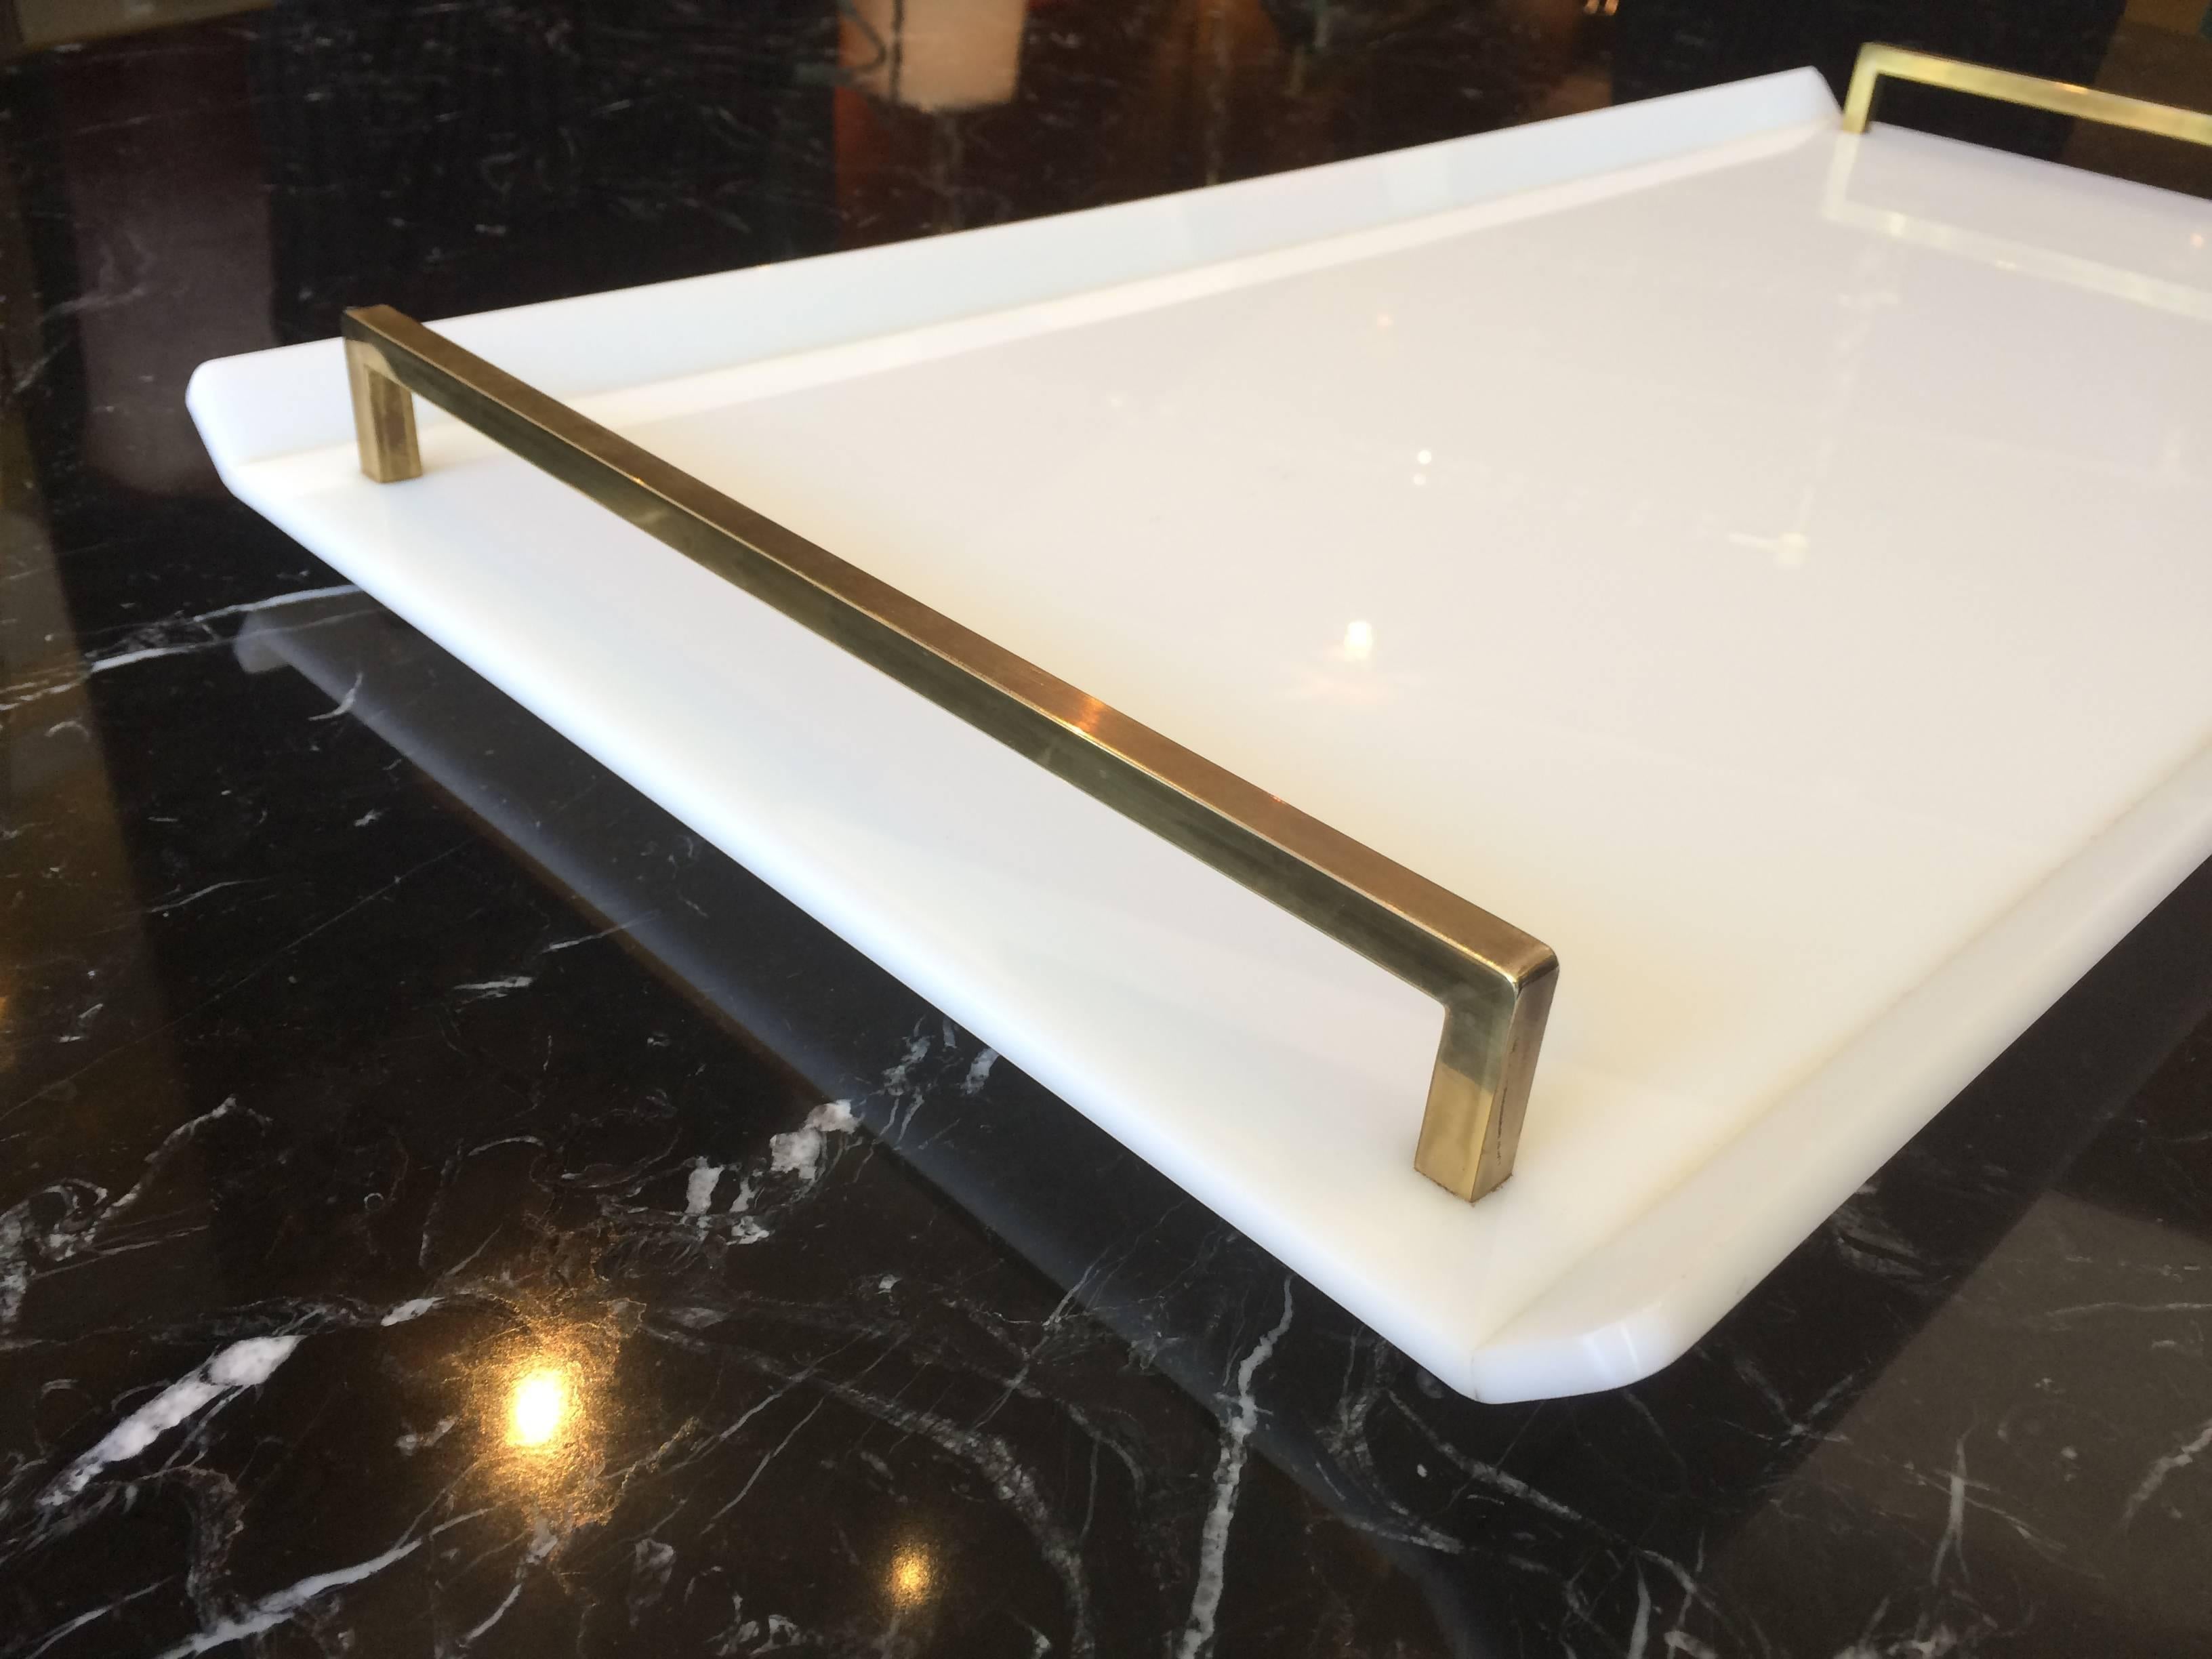 Vintage Lucite and nickel serving tray designed and manufactured by Charles Hollis Jones.
The tray is part of the ball collection that was originally created for Lucille Ball and the whole line became to be known as the 